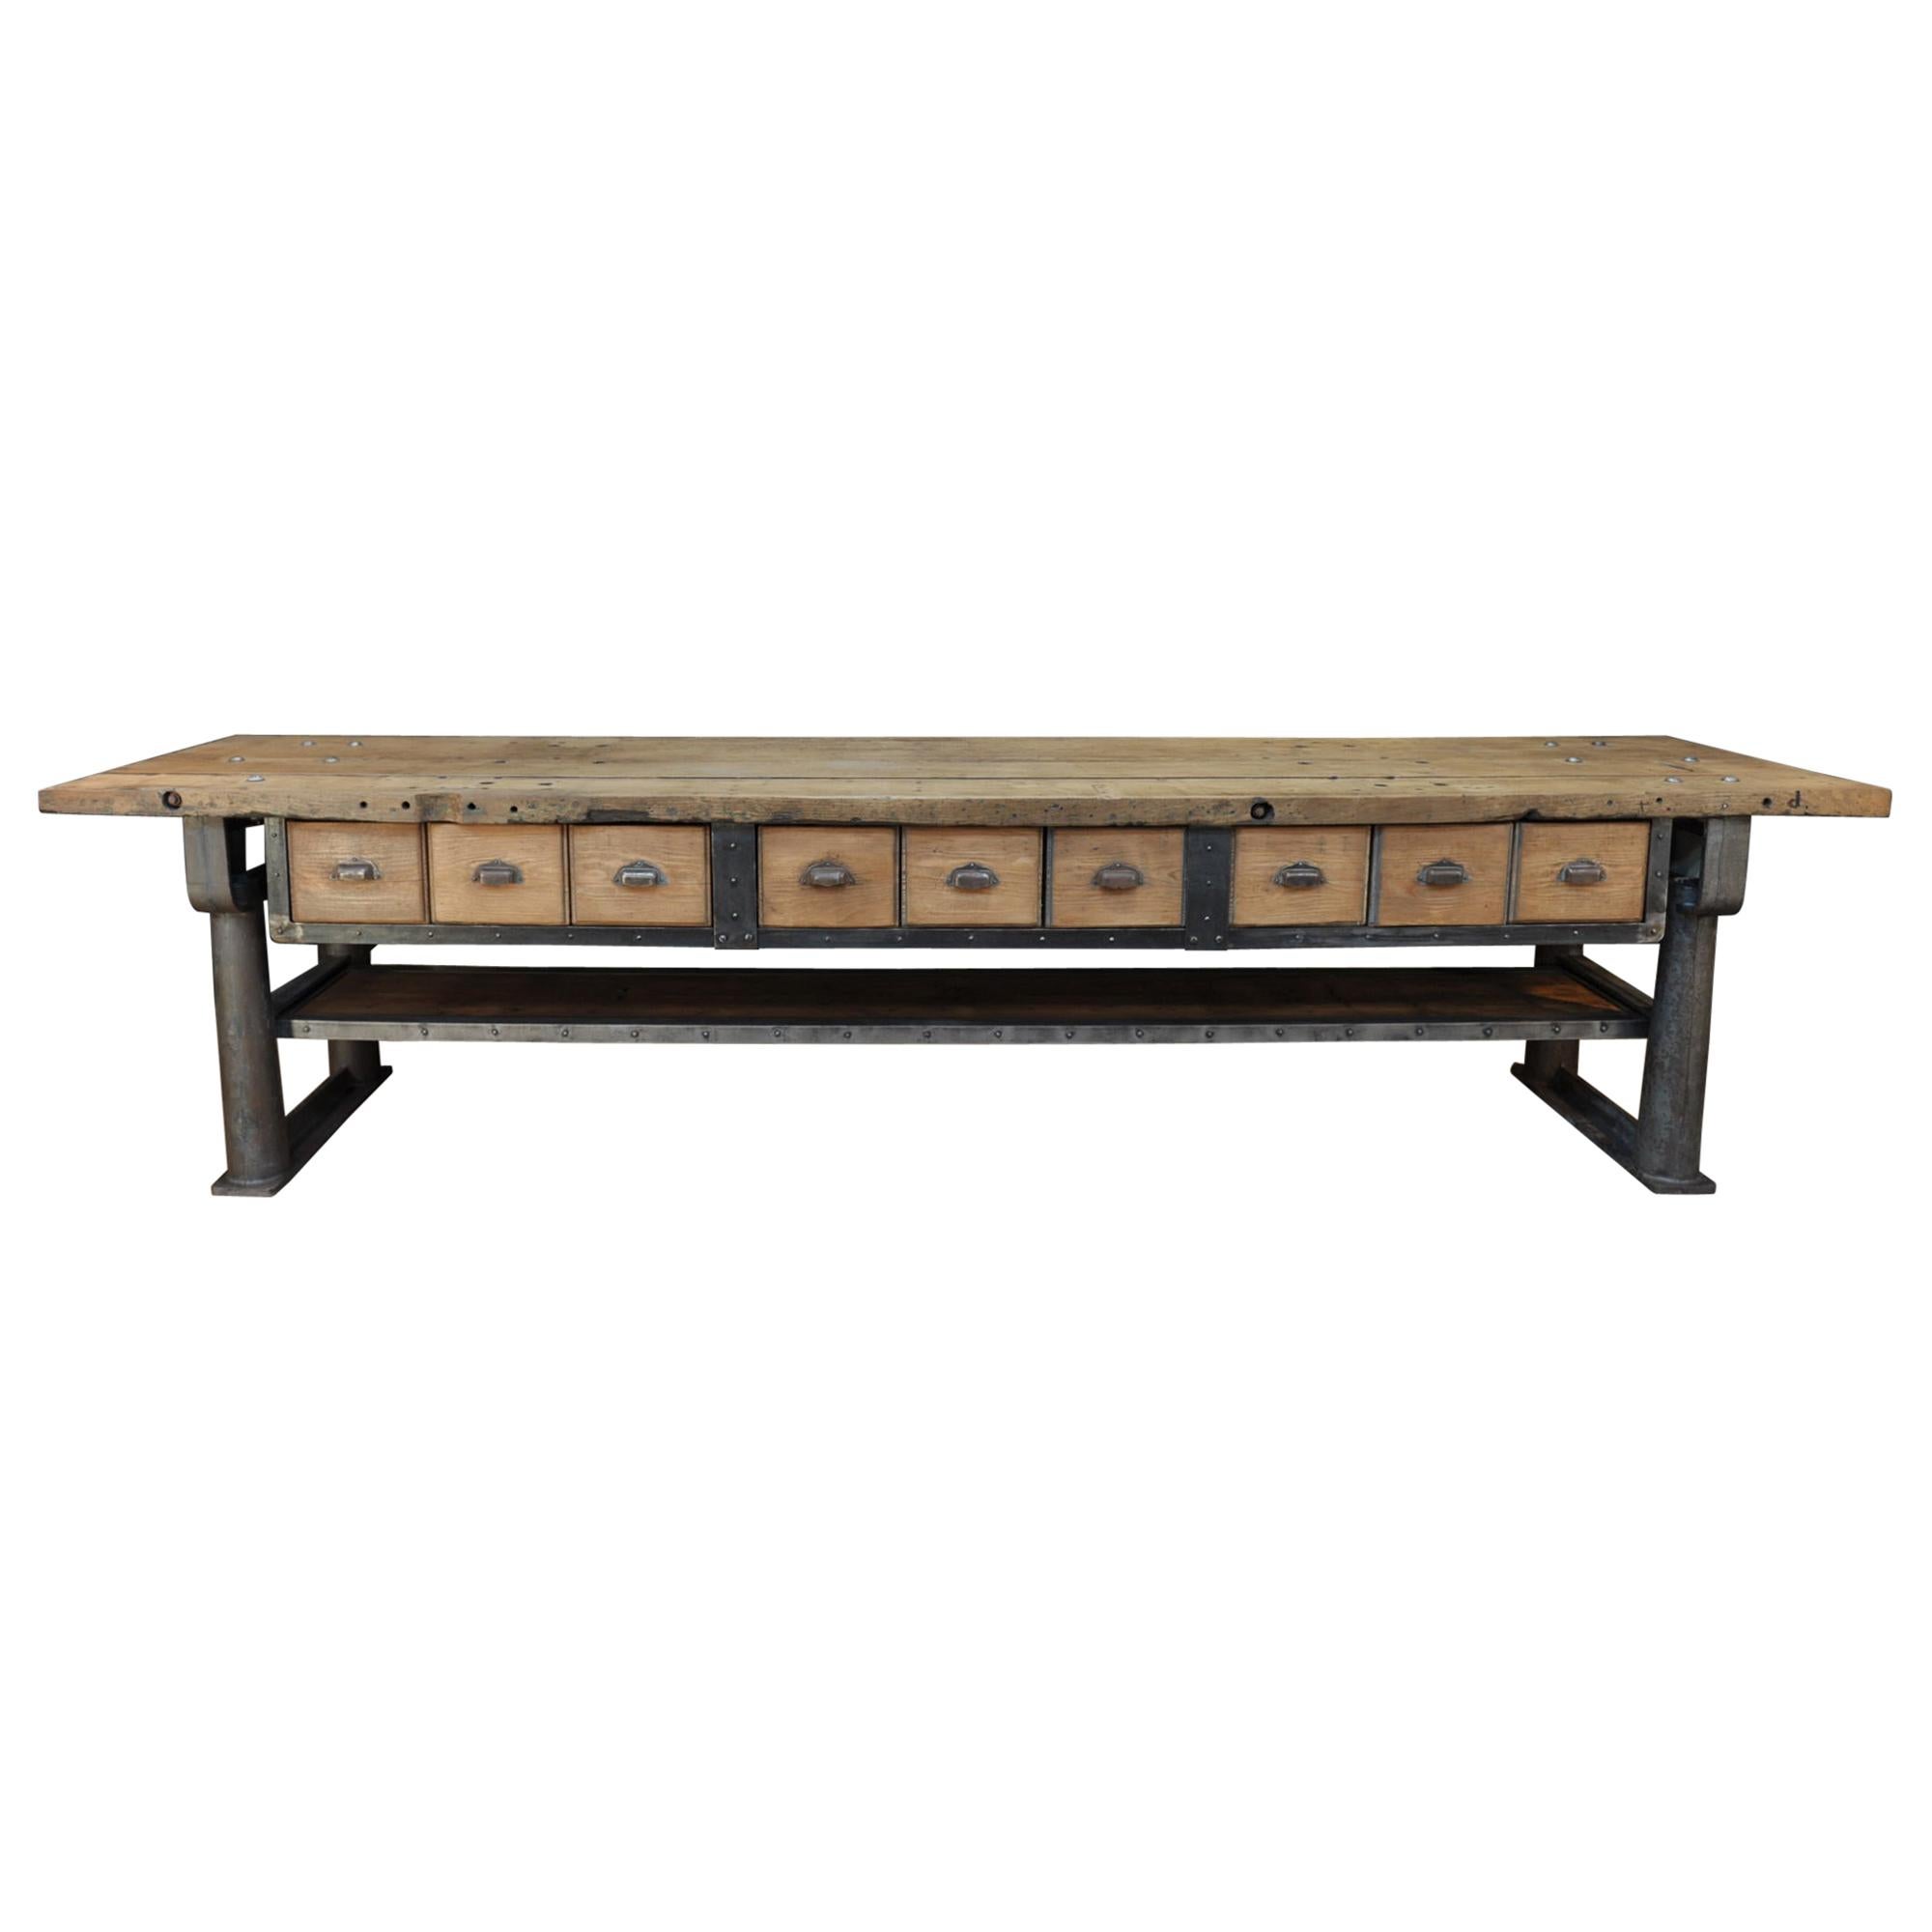 Long Industrial Work Console Table in Cast Iron with 9 Drawers Franc, circa 1900 For Sale